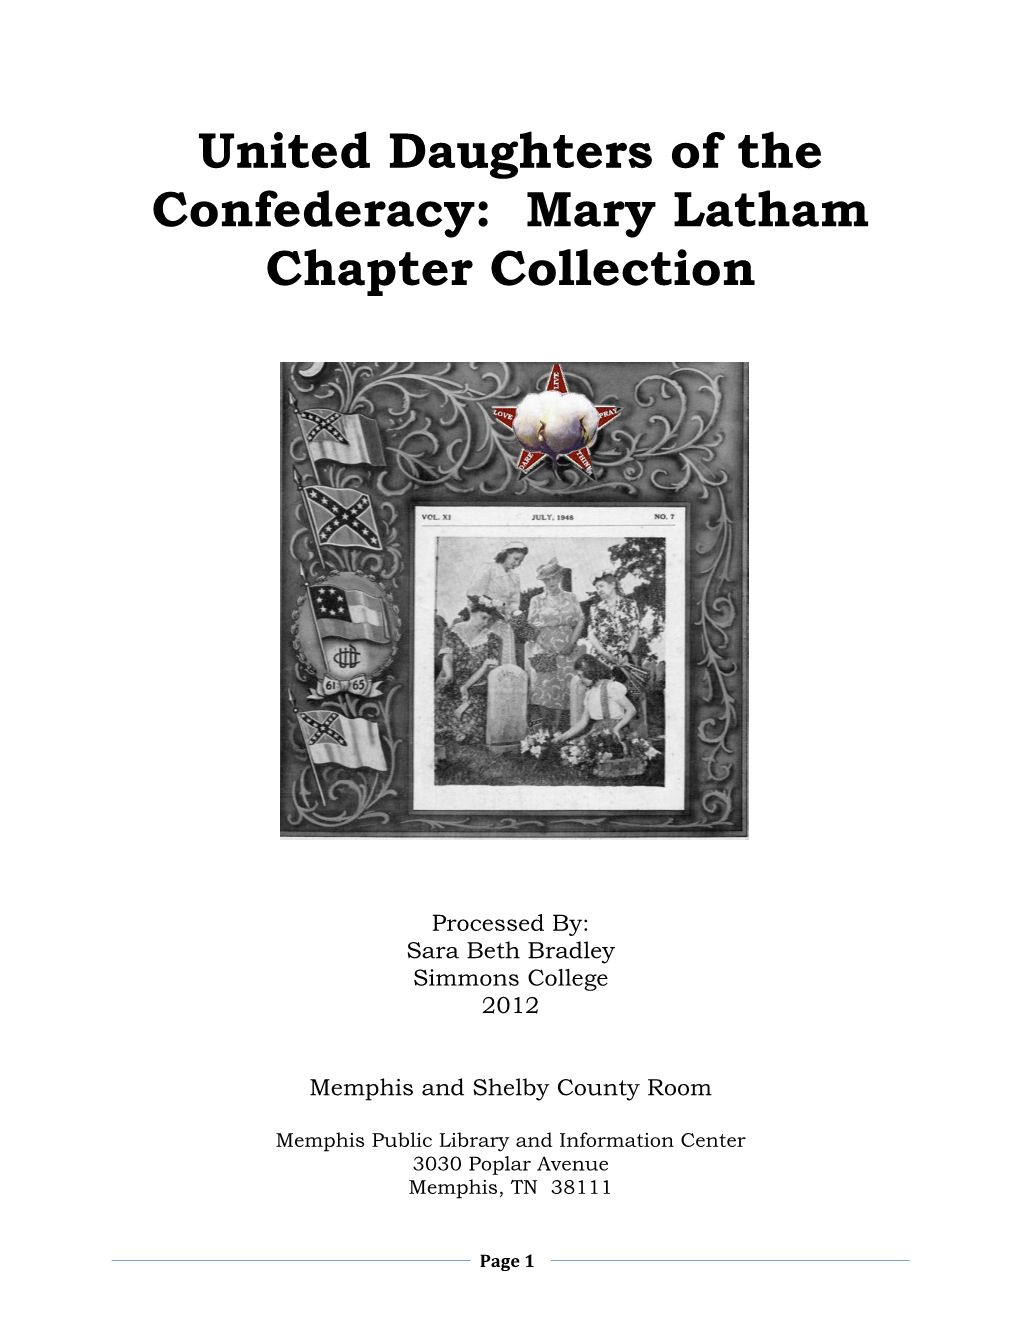 United Daughters of the Confederacy: Mary Latham Chapter Collection